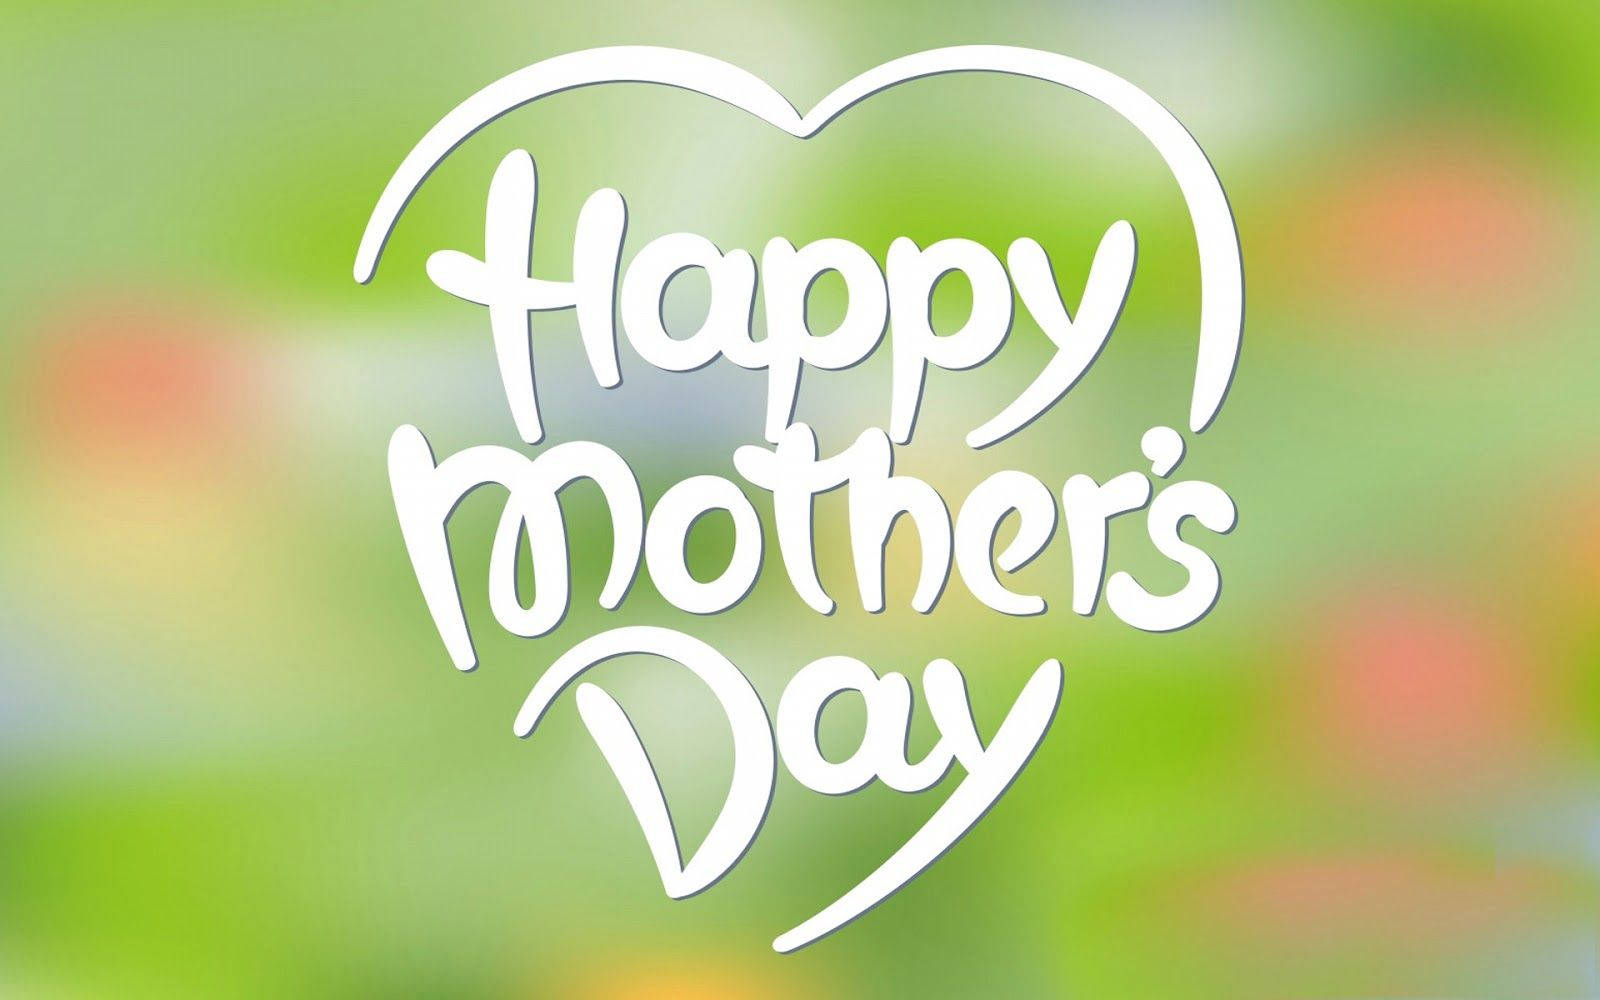 Free Mothers Day Wallpaper Downloads, [100+] Mothers Day Wallpapers for FREE  